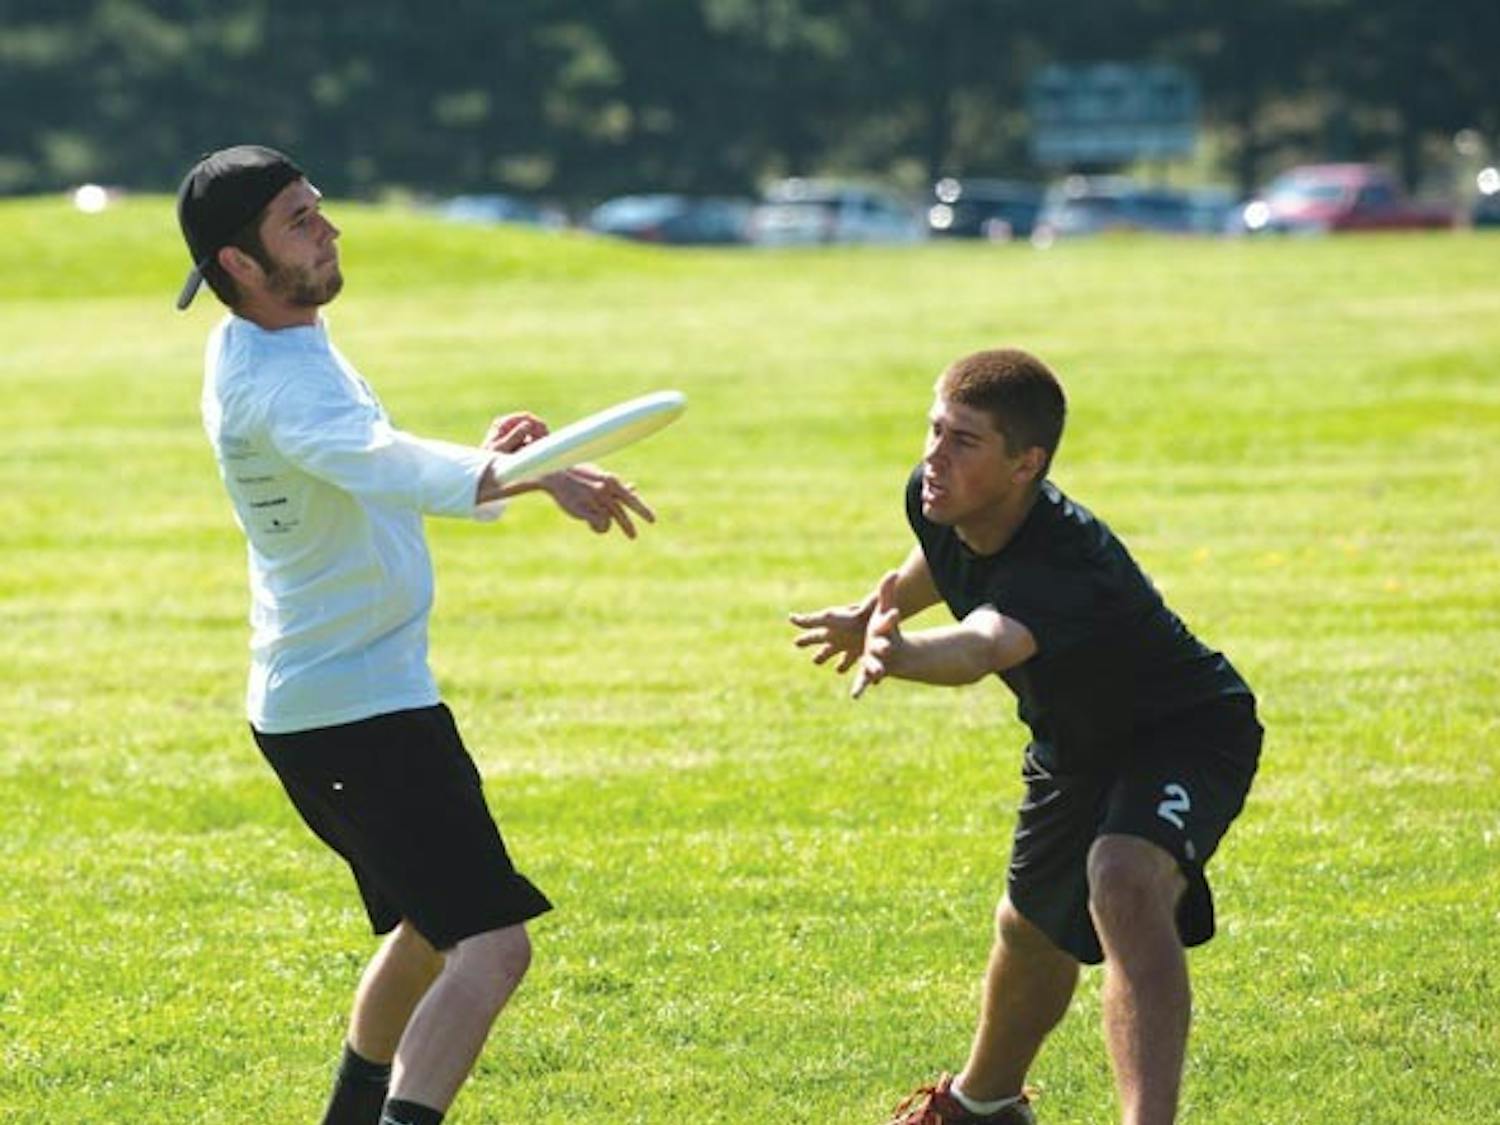 Ultimate Frisbee: Rocky start leads to early exit for Ohio Ultimate team  